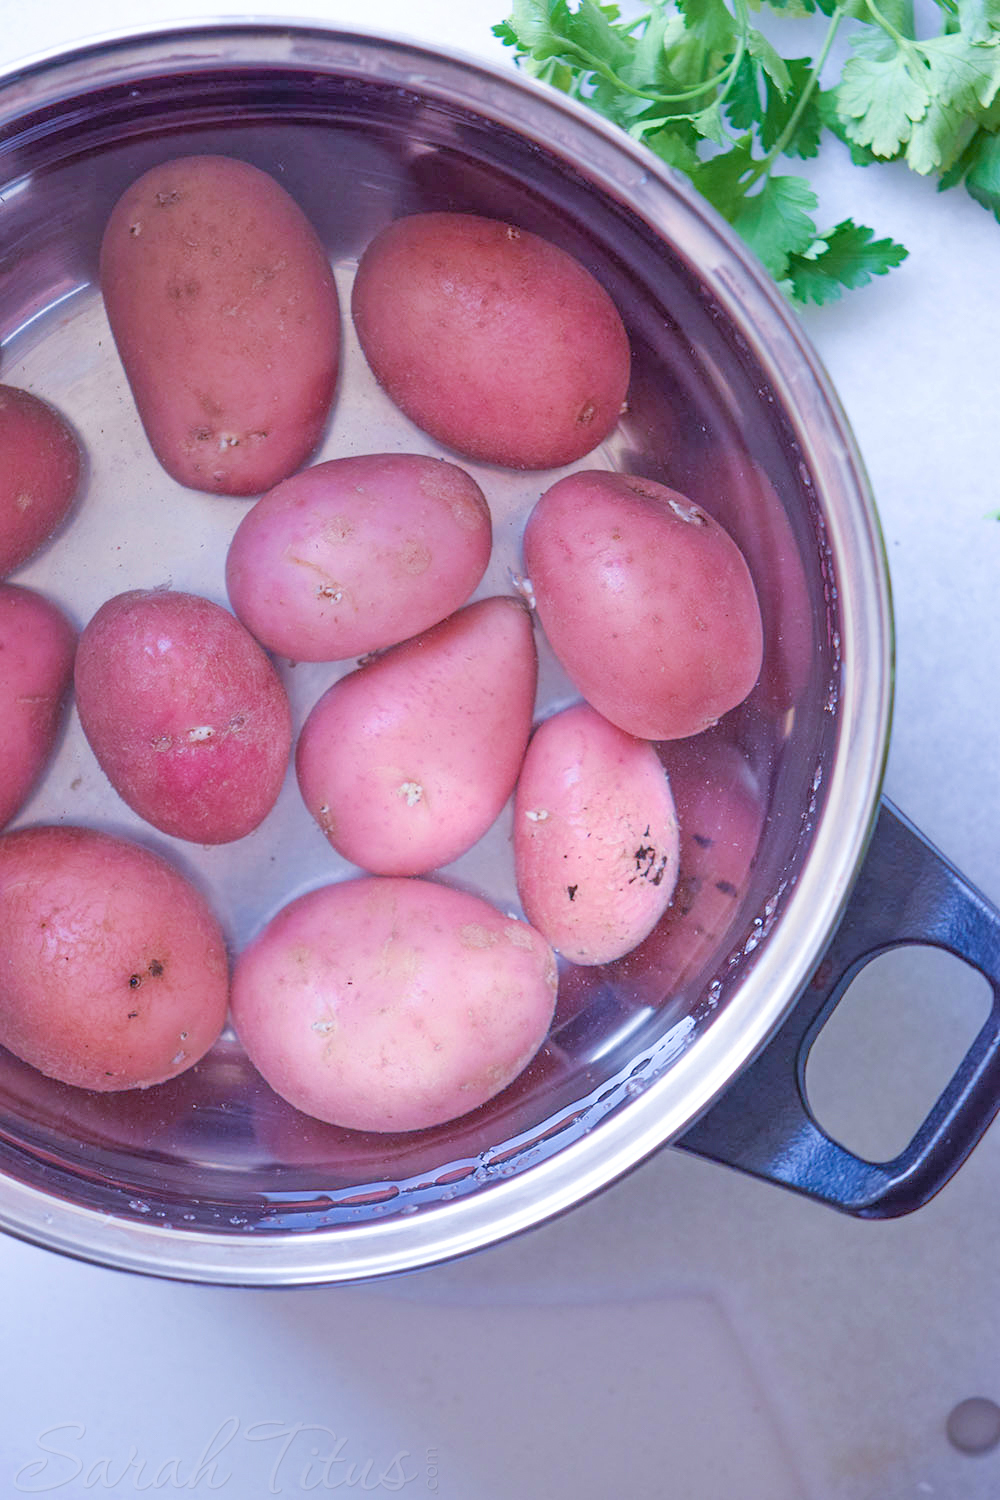 Small red potatoes in a pan of water to cook